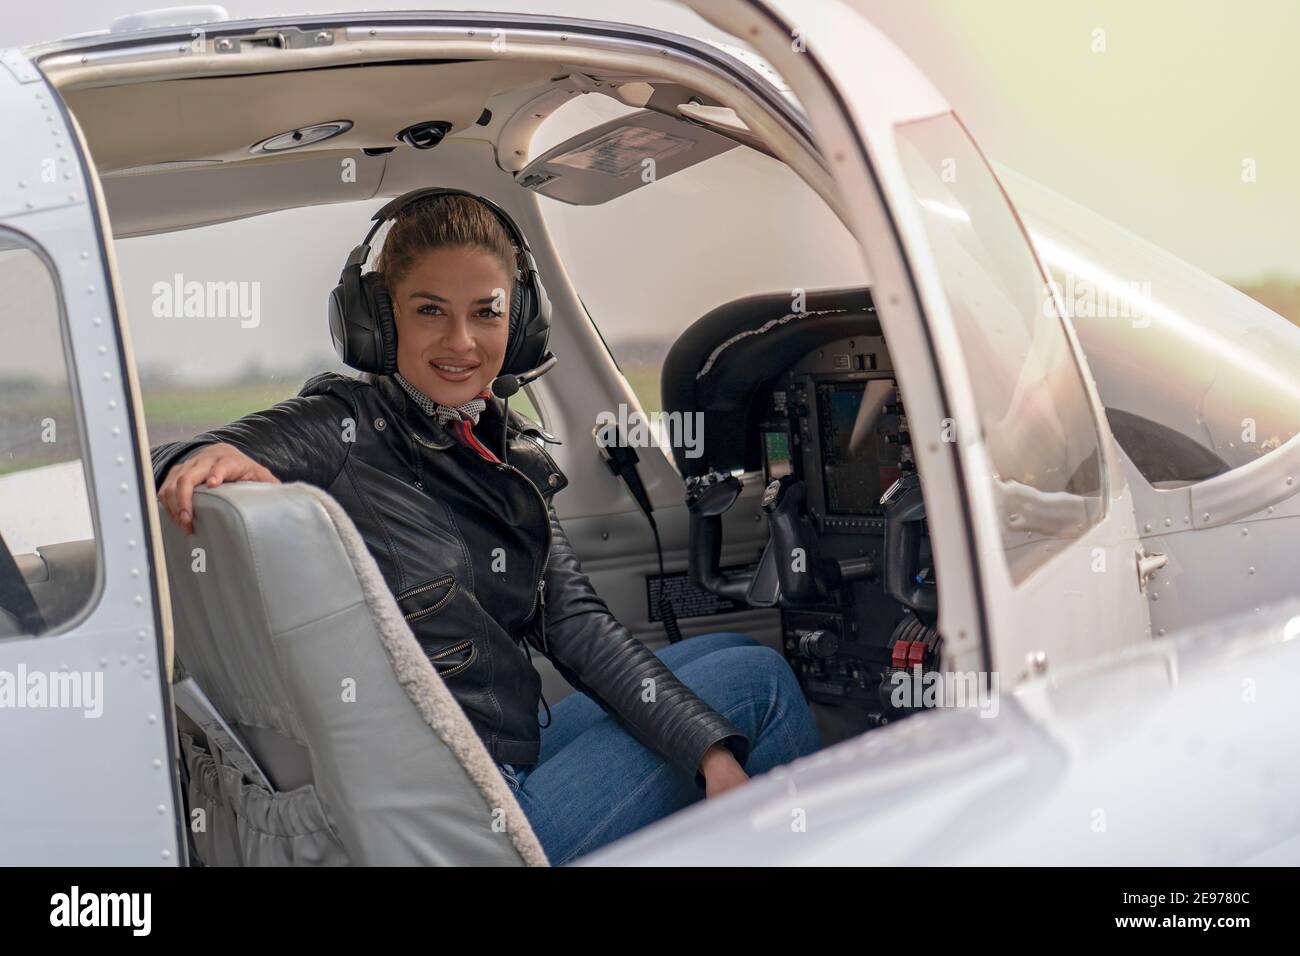 Portrait of Attractive Young Woman Pilot with Headset in Cockpit. Smiling Female Pilot Looking at Camera. Stock Photo